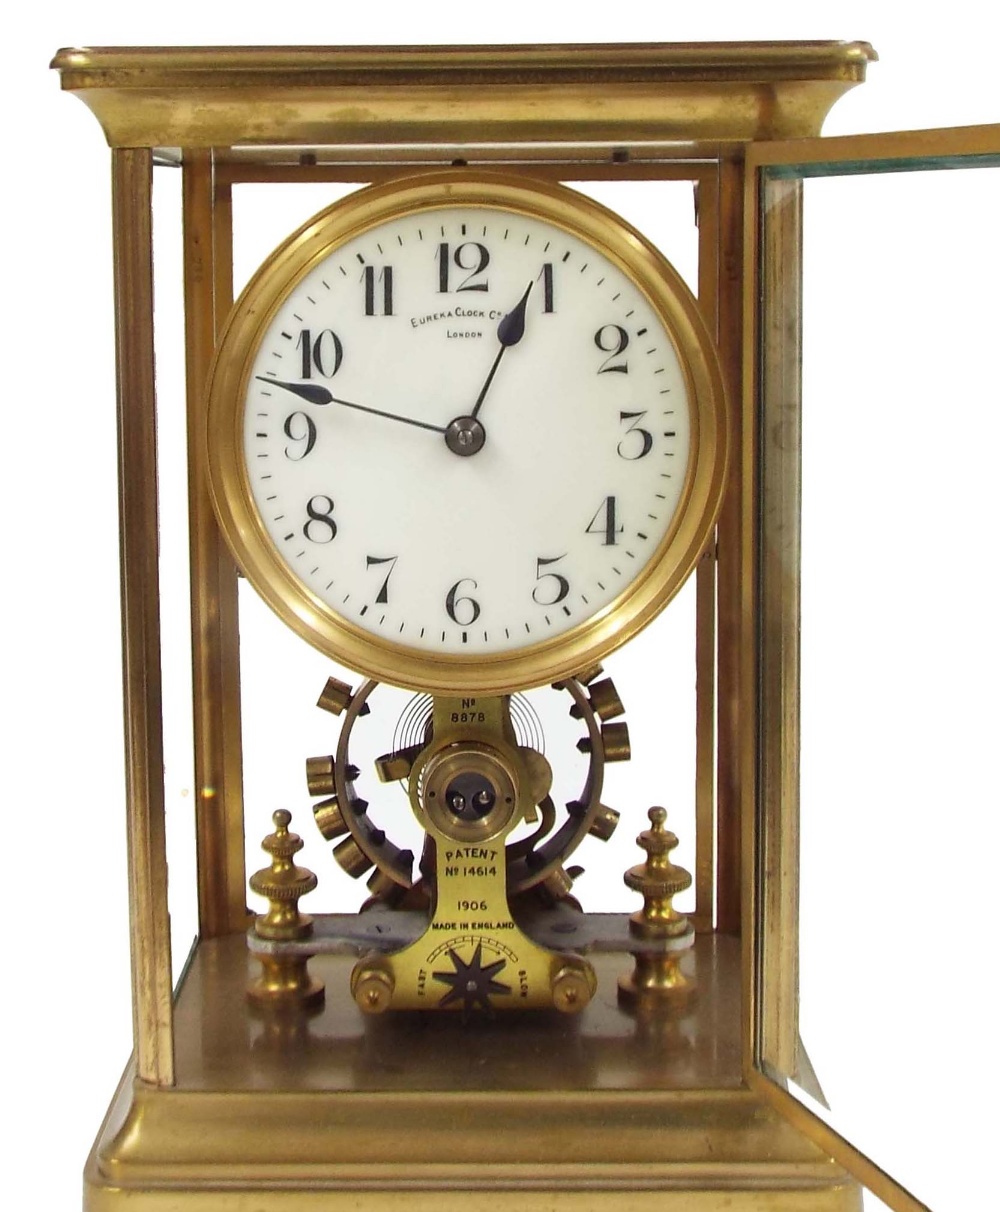 Eureka Clock Co Limited four glass electric mantel clock, the 4.25" cream dial over the movement and - Image 2 of 3